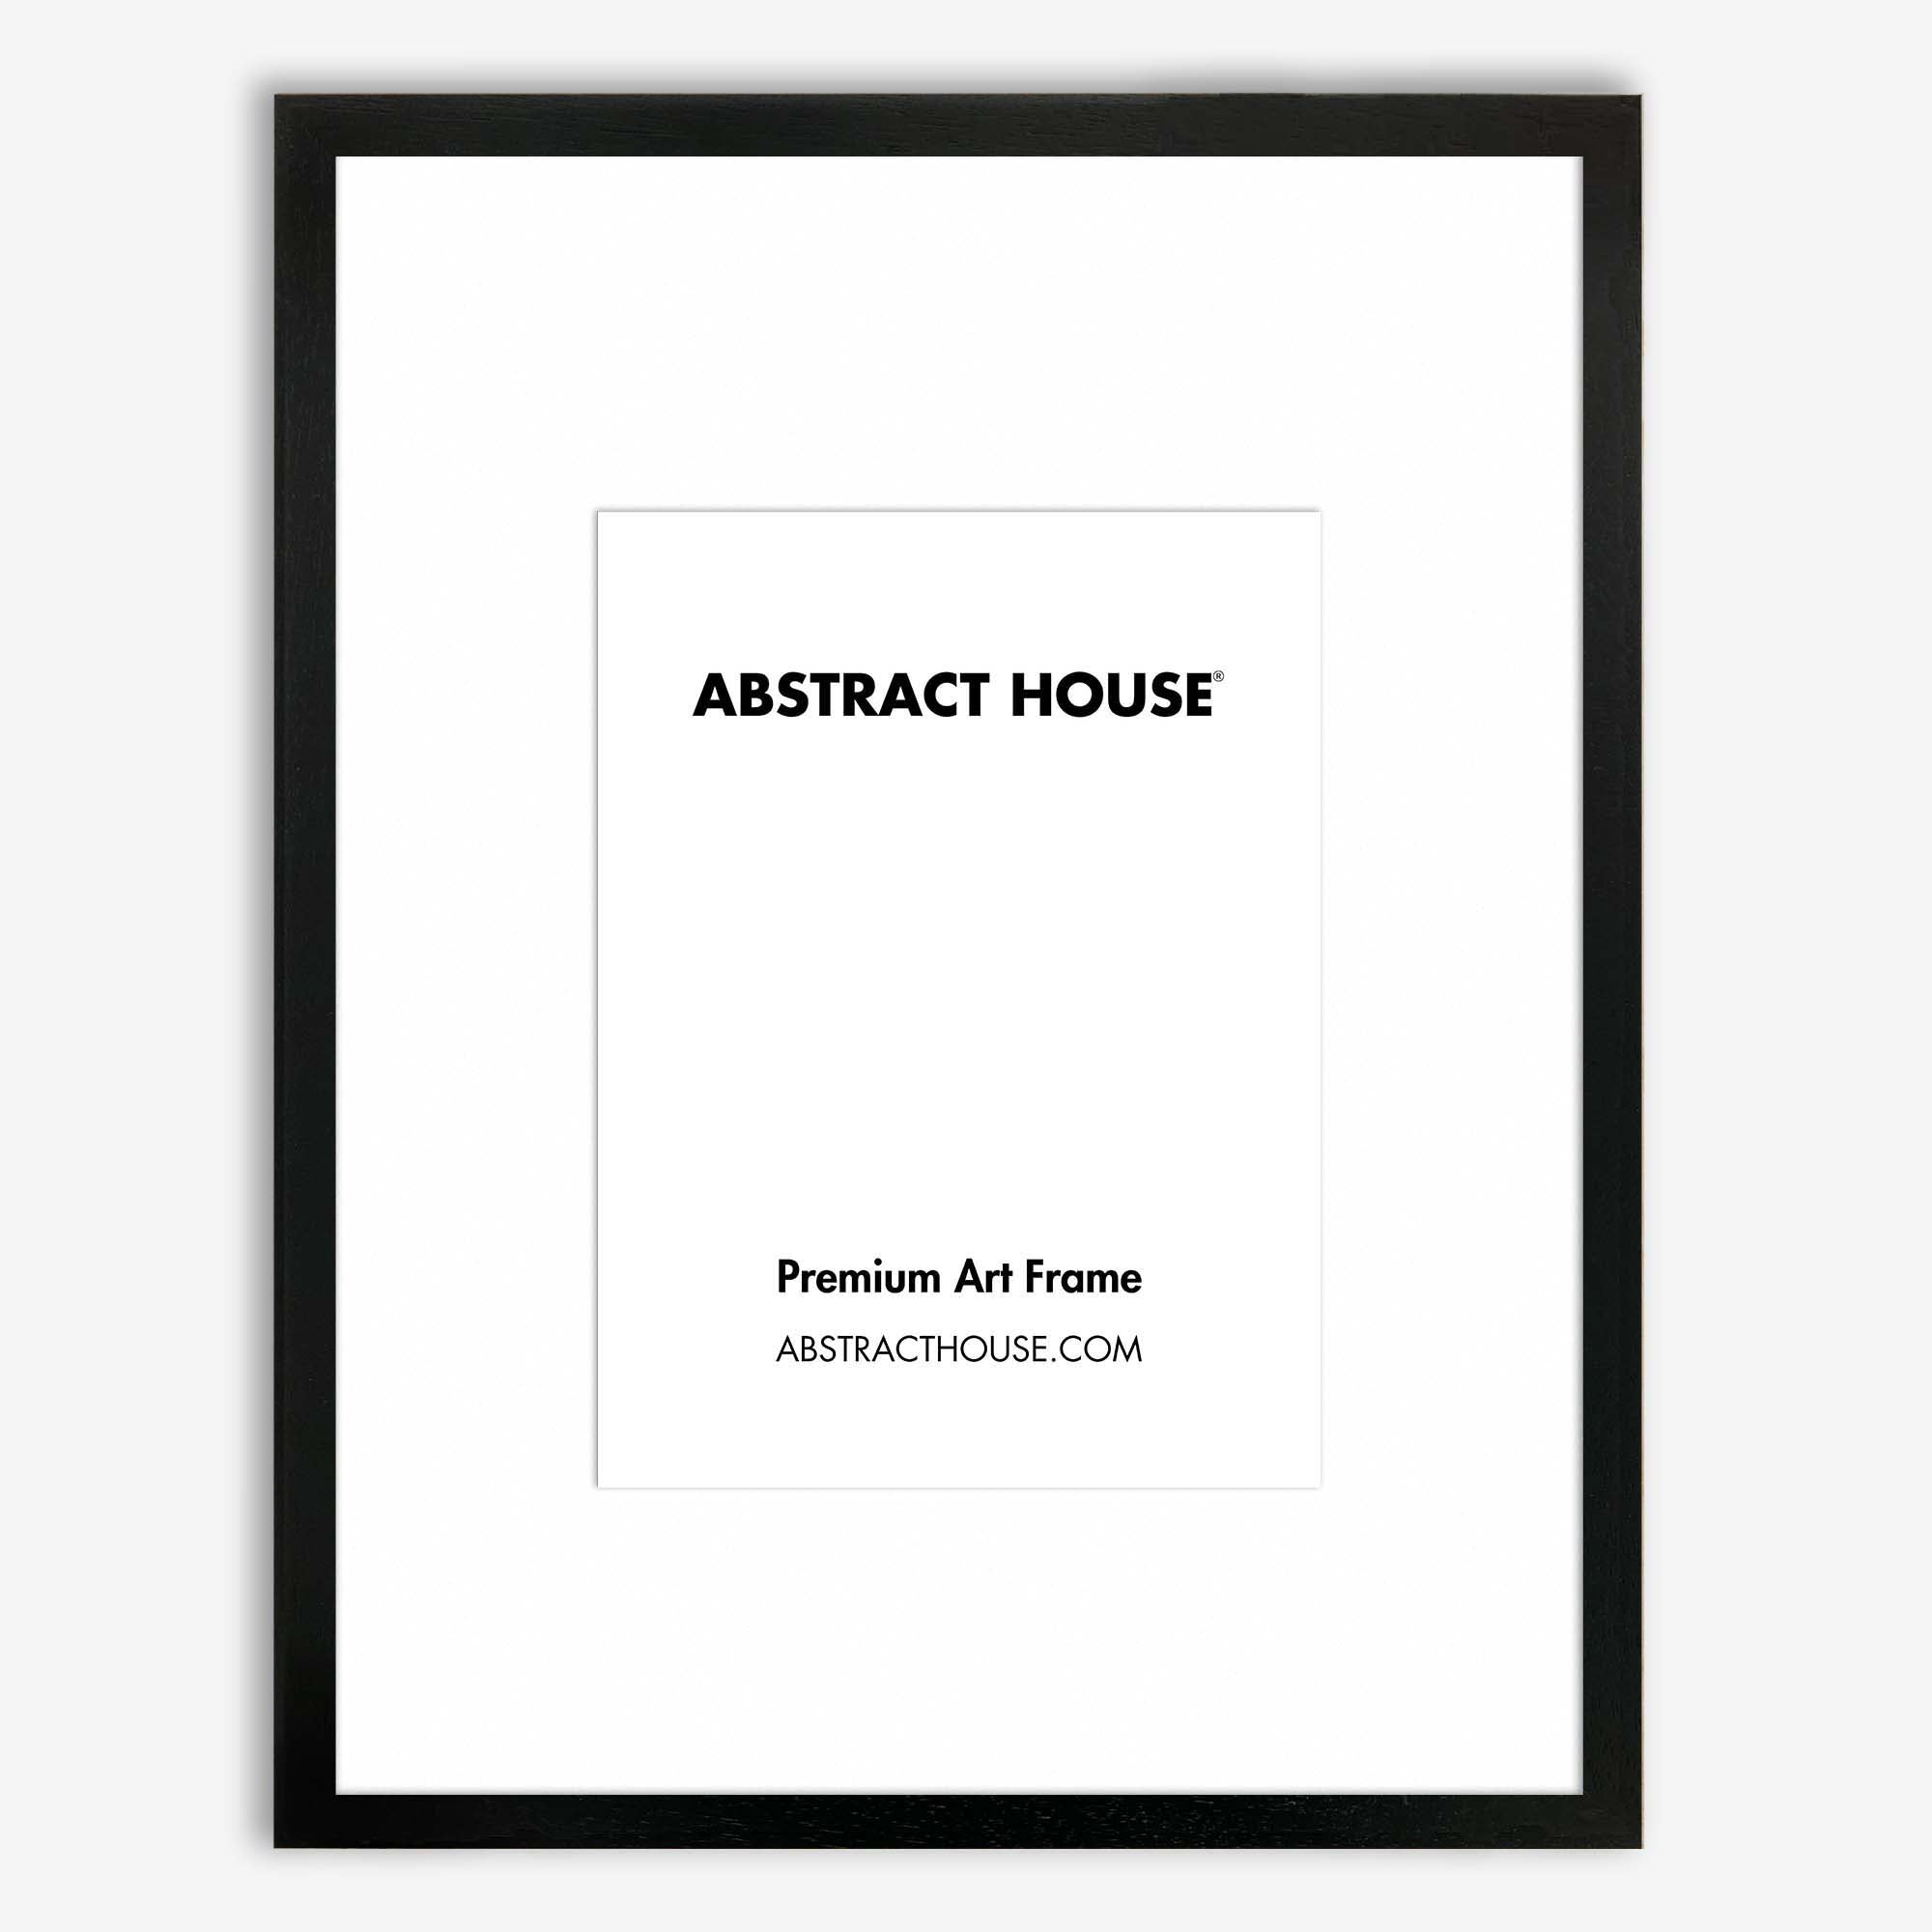 50x70cm Wooden Picture Frame-Black-A3 29.7 x 42 cm-Abstract House